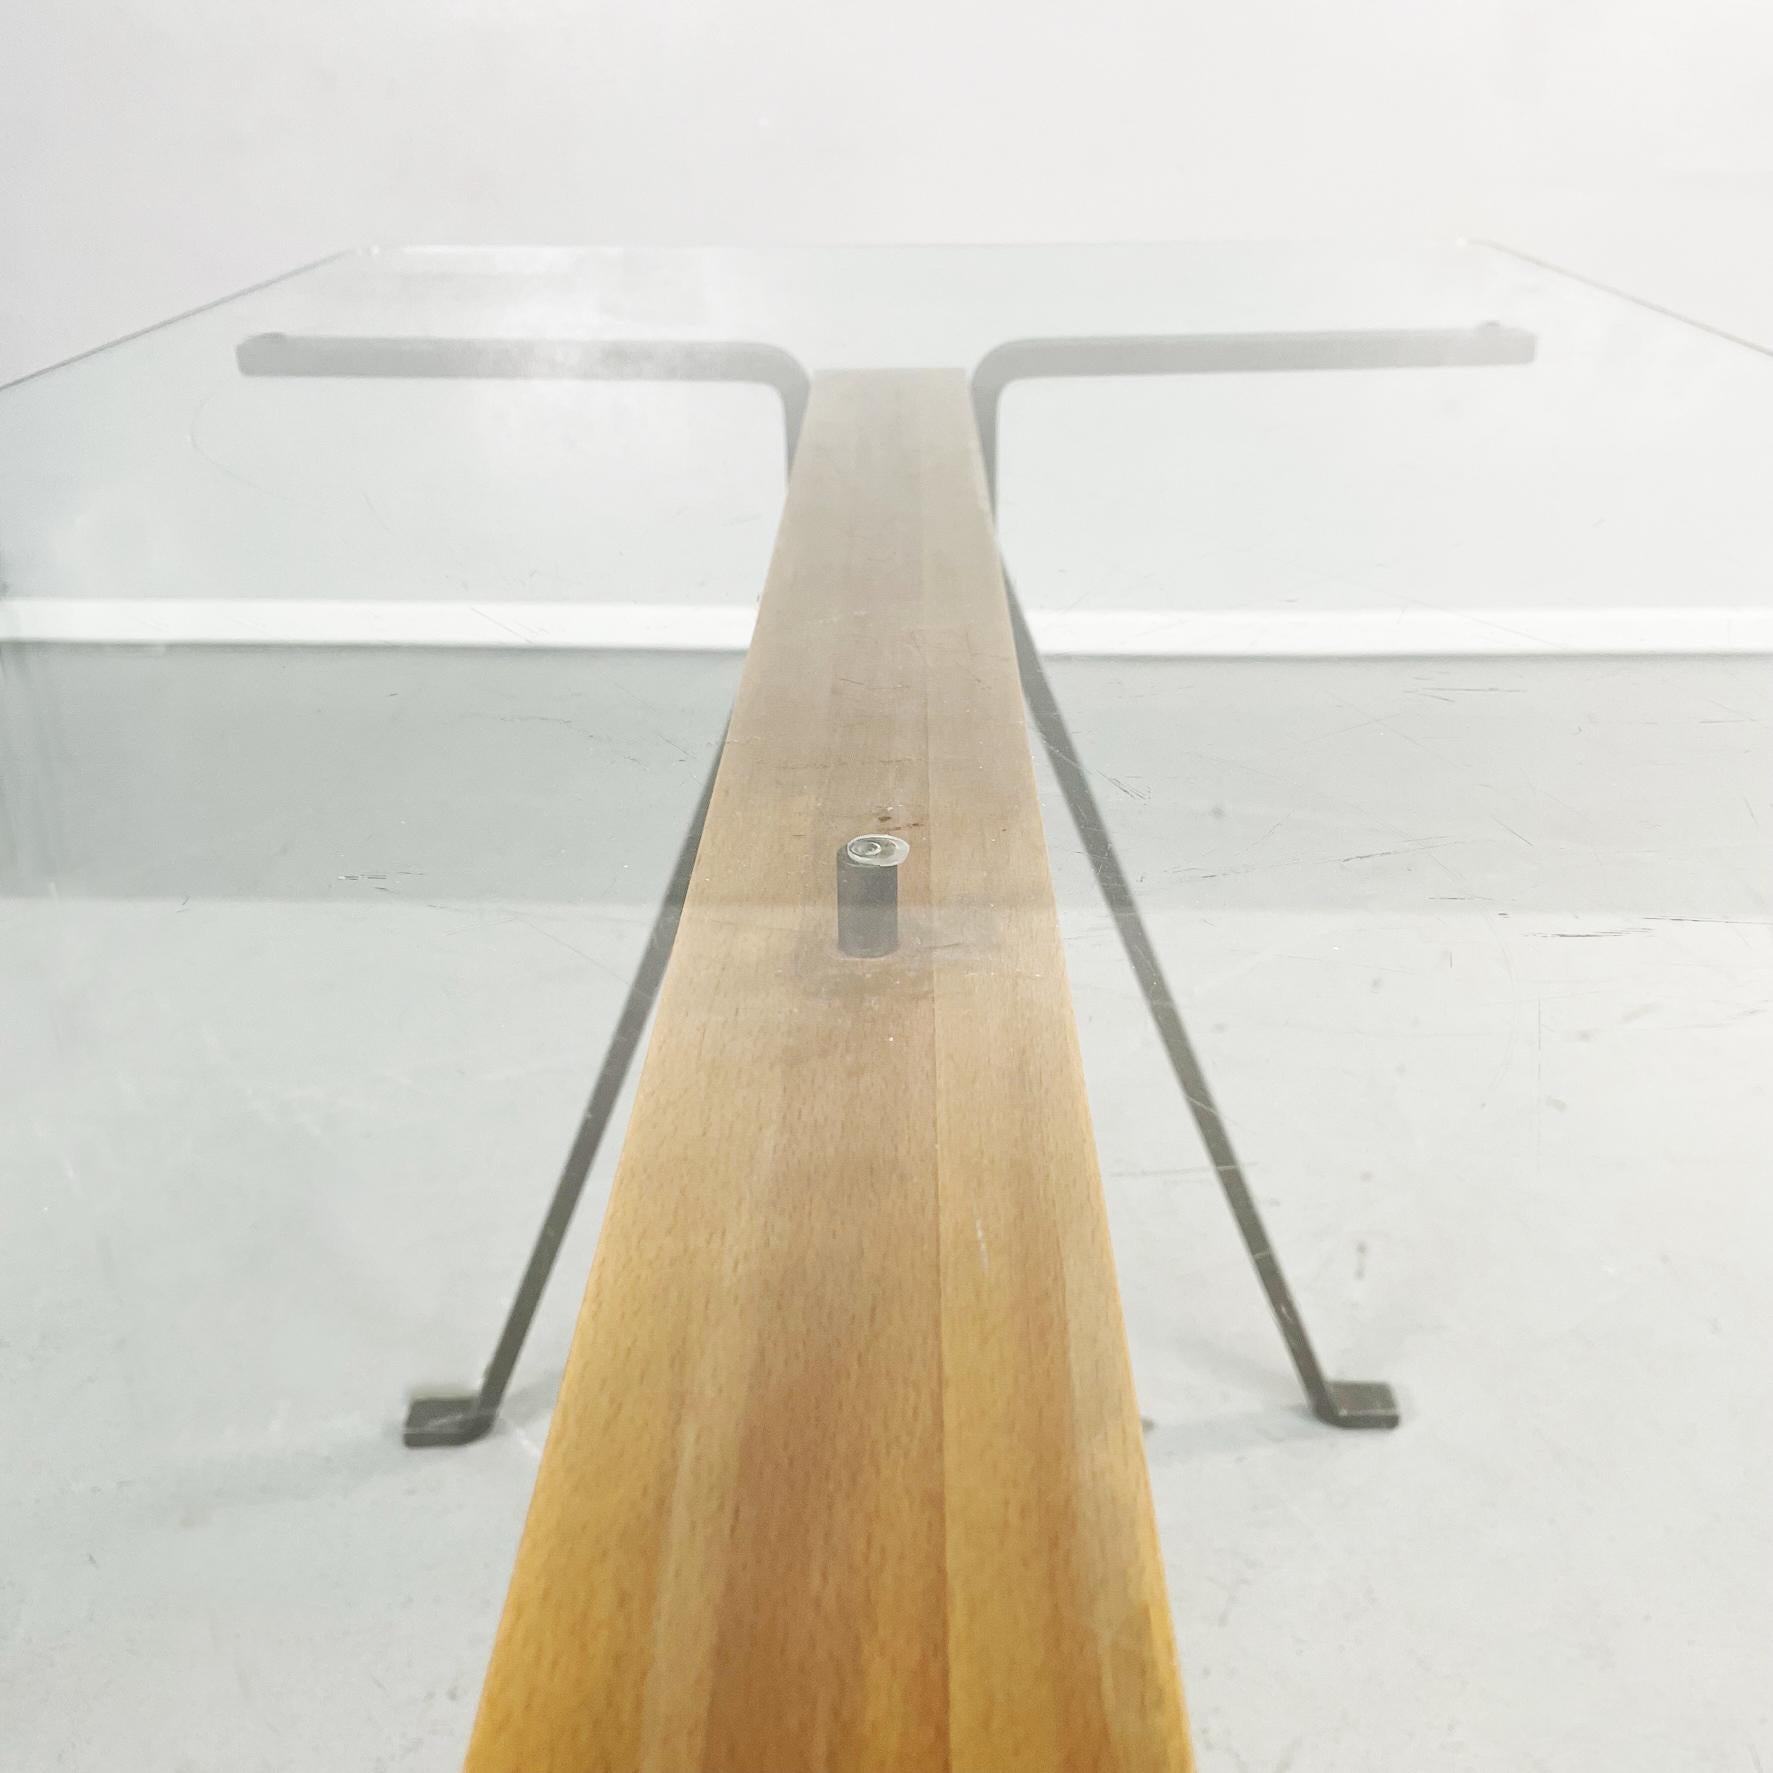 Italian Modern Glass Wood Steel Dining Table Frate by Enzo Mari for Driade, 1973 For Sale 1